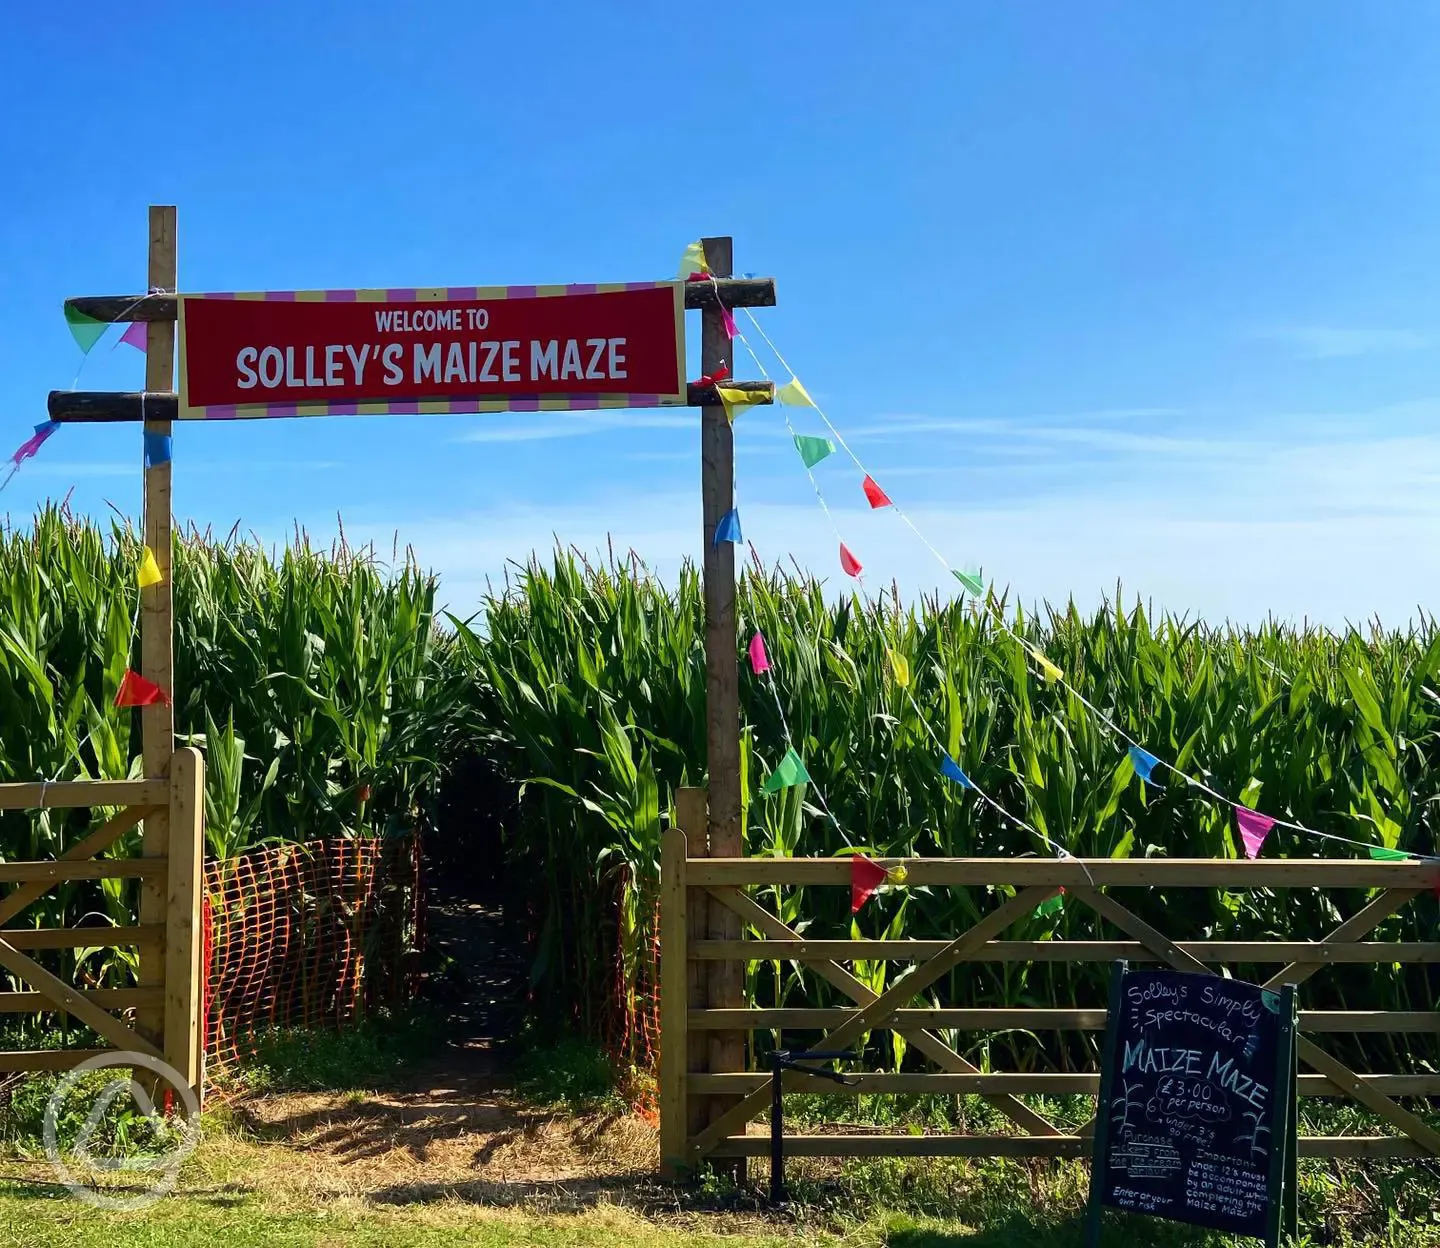 Solley's maize maze open in late summer